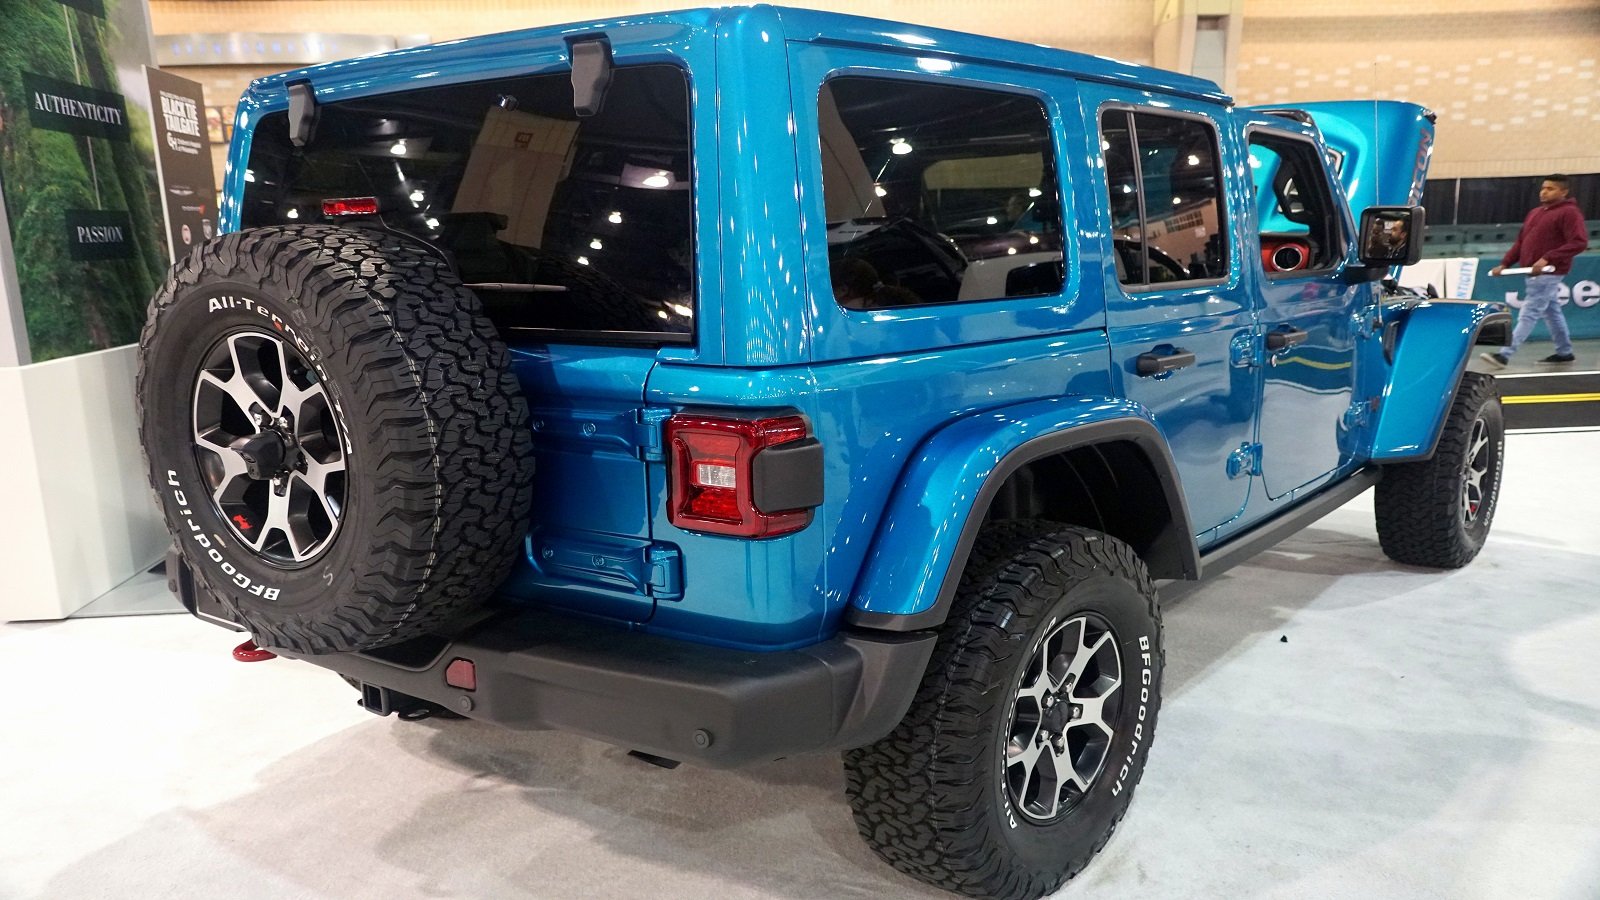 <p>The Jeep Gladiator, a popular pickup truck, might not be the best choice for car buyers in 2024. Here are suggestions to consider before making a purchase decision:</p><ul> <li><strong>Fuel Efficiency</strong>: The Jeep Gladiator is known for its poor fuel economy, which could be hard on your wallet with the rising fuel prices.</li> <li><strong>Payload Capacity:</strong> The Gladiator’s payload capacity is lower compared to its competitors, which might be a significant drawback for those who plan to use the truck to haul heavy loads.</li> <li><strong>Price</strong>: It has a higher starting price than other mid-size trucks, making it a less budget-friendly option.</li> <li><strong>Off-road Capability Trade-offs</strong>: While the Gladiator is known for its off-road abilities, this comes at the expense of on-road comfort and handling.</li> </ul><p><strong>RELATED</strong>:  <a href="https://www.miramarspeedcircuit.com/10-rare-mustangs-ford-fanatics/">10 Ultra-Rare Mustangs Most Ford Fanatics Never Heard About</a>!</p>